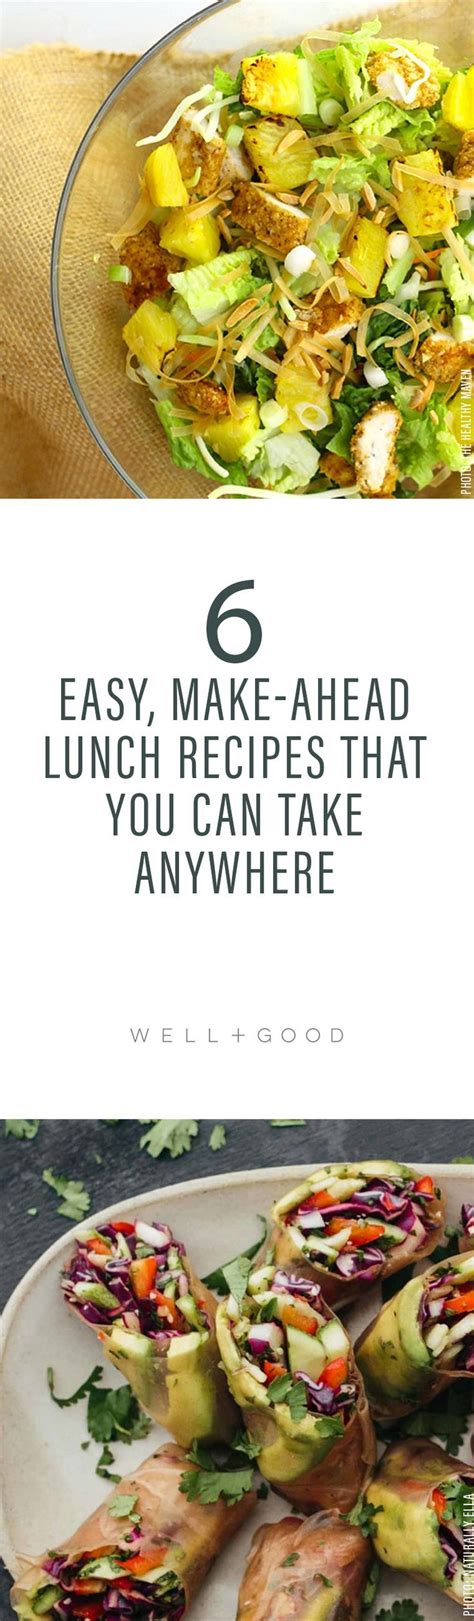 healthy   lunch recipes  summer wellgood lunch